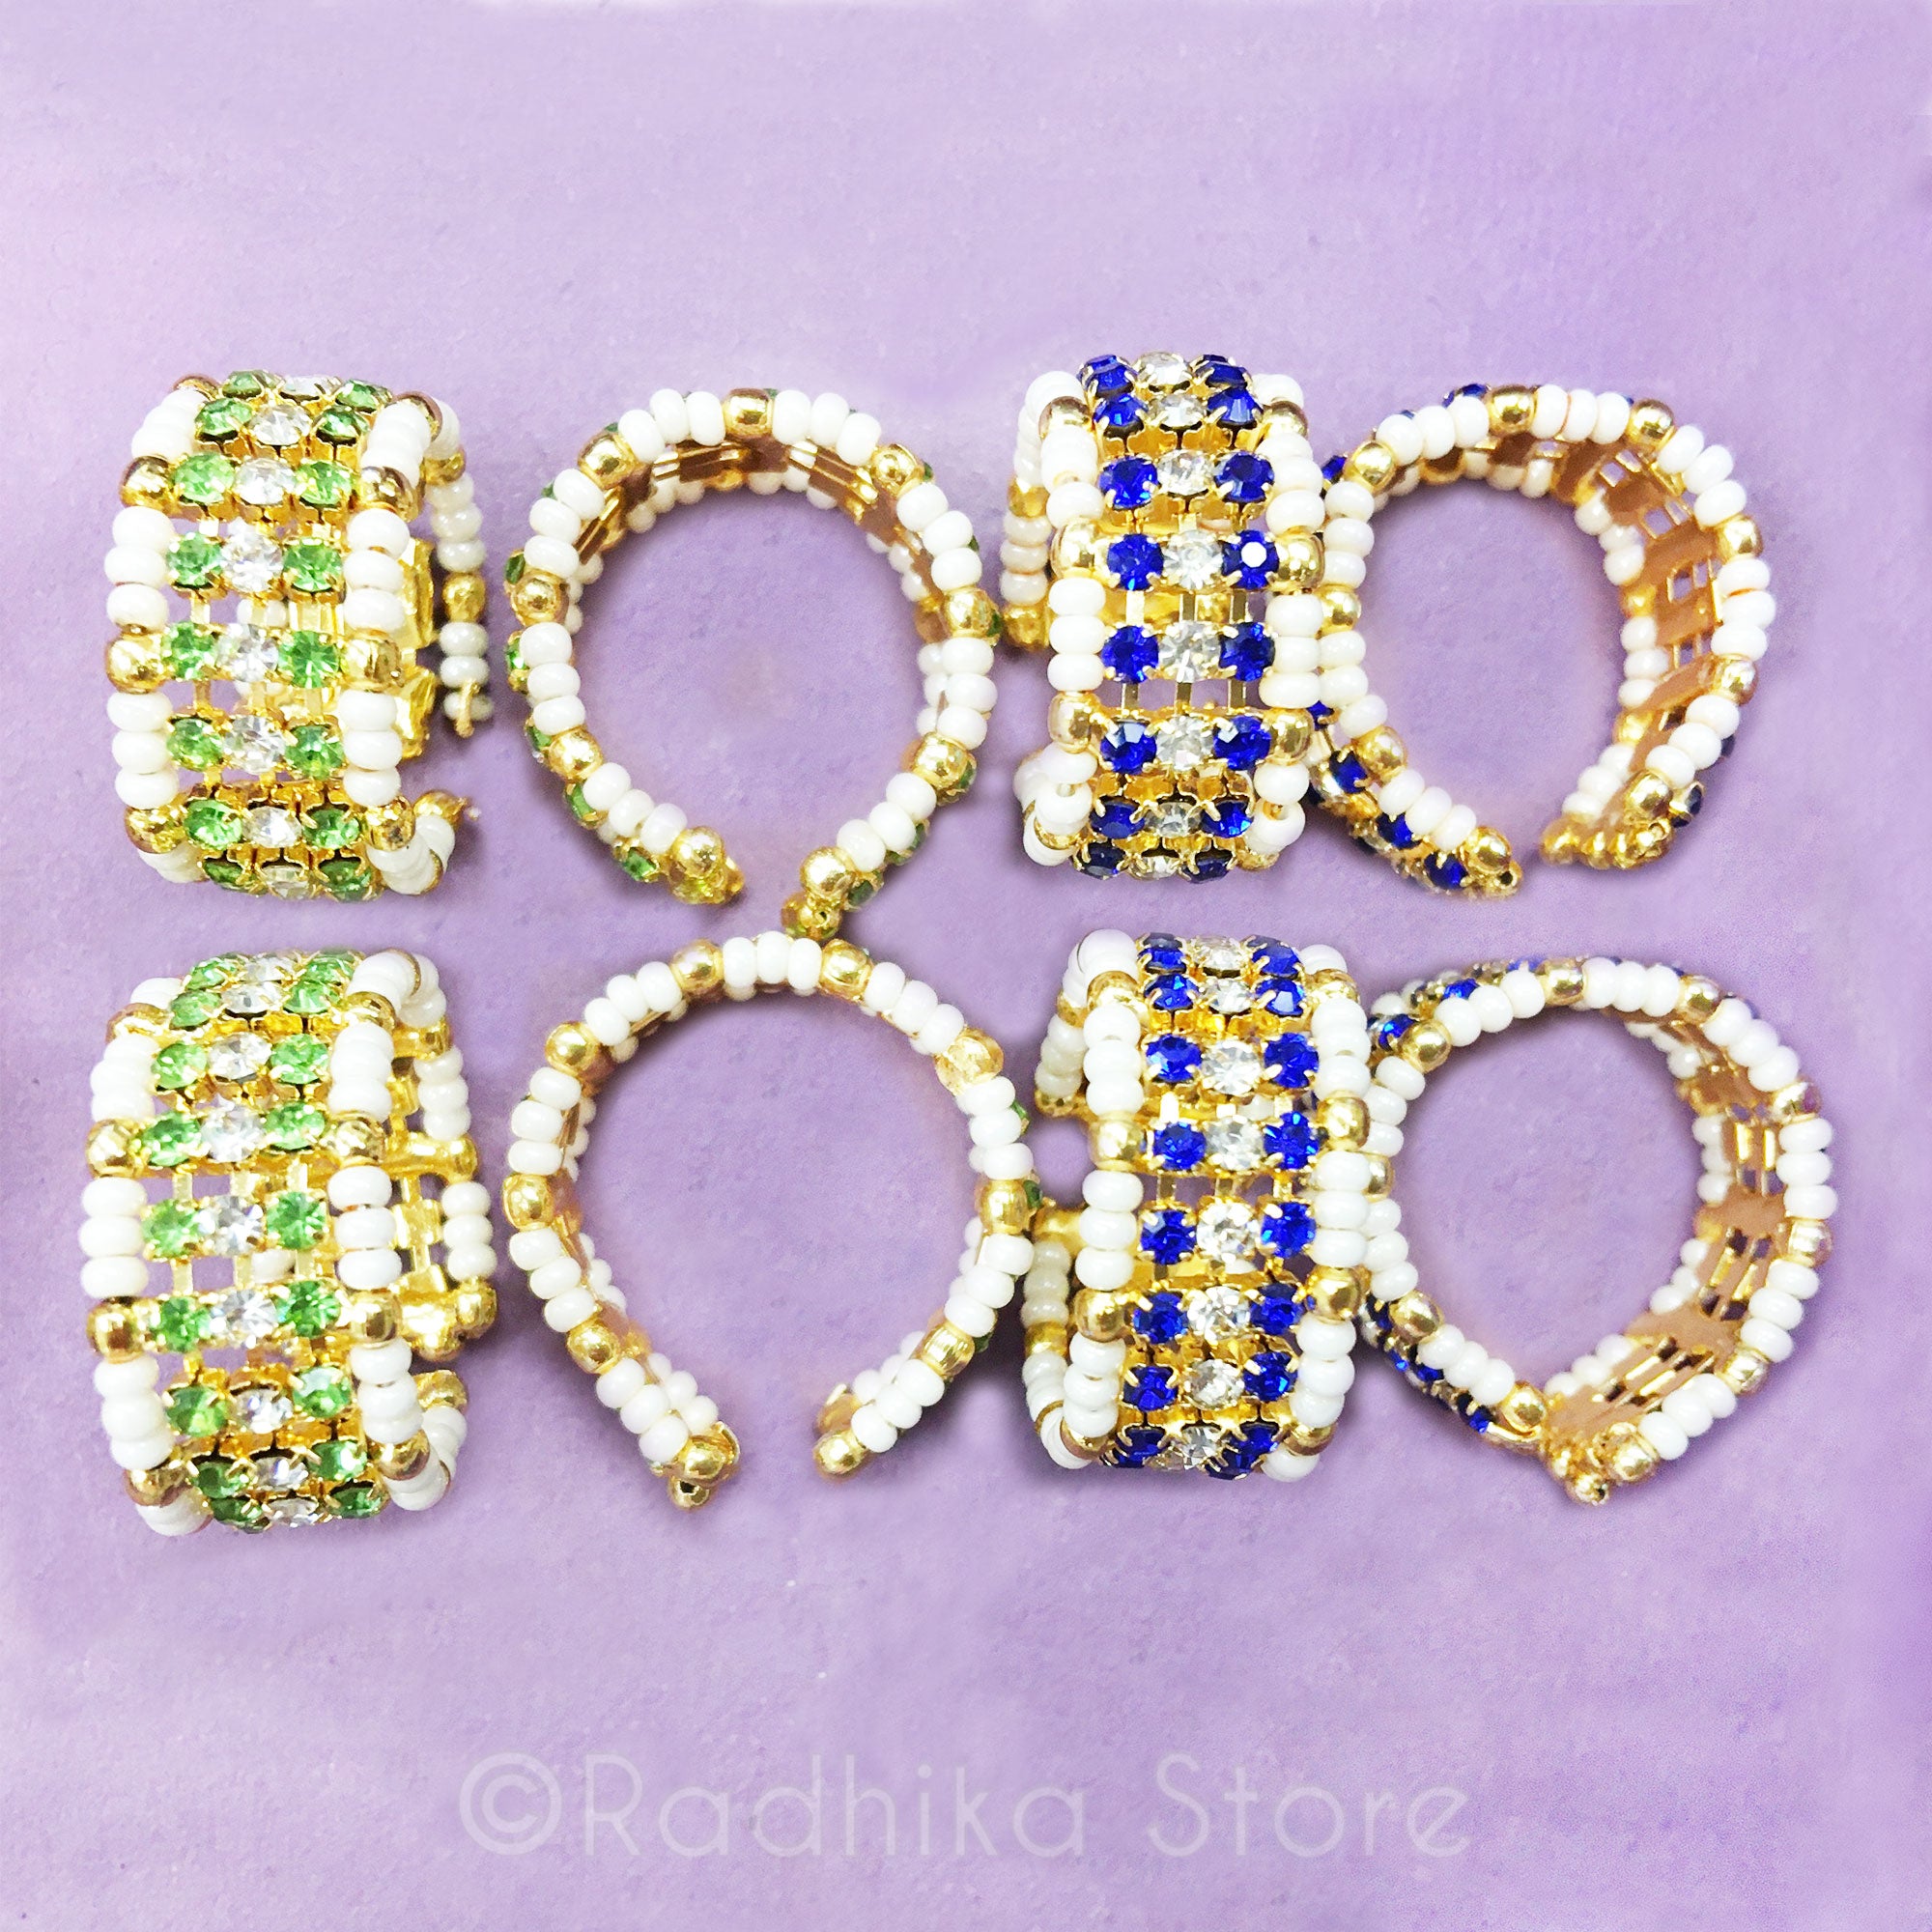 Peridot  Or Sapphire Blue With Pearly Seed Bead -Deity Bangles Set- Medium or Large